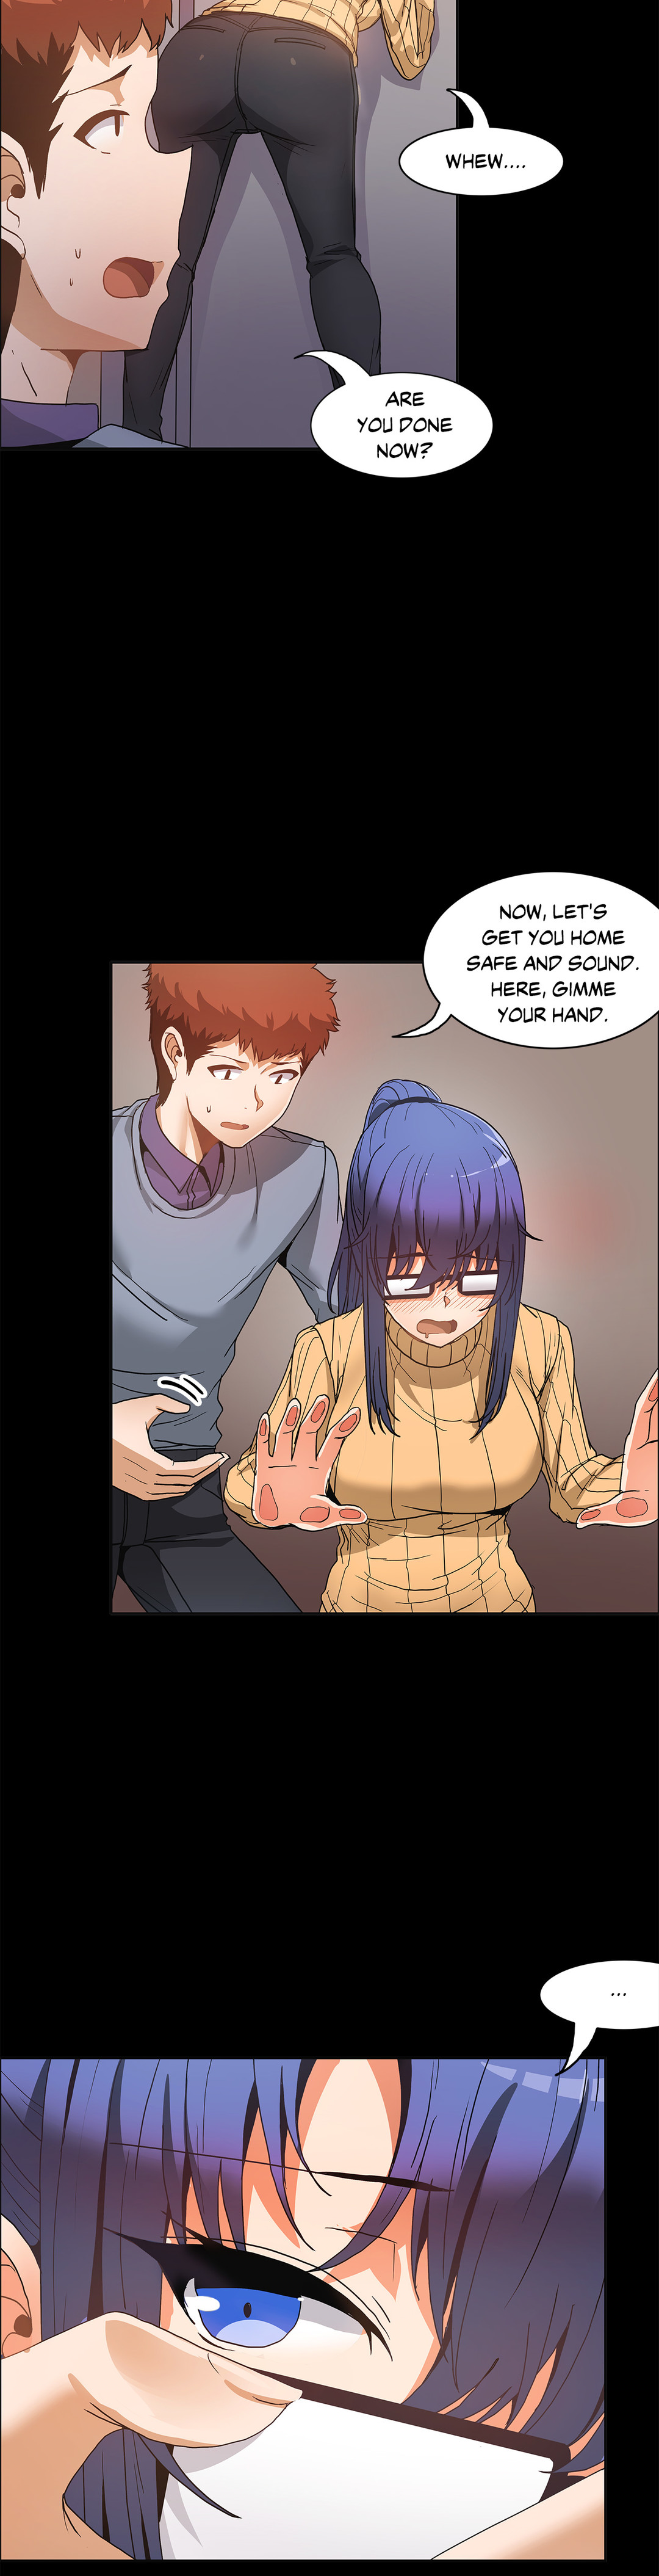 The Girl That Wet the Wall Ch 48 - 50 page 9 full